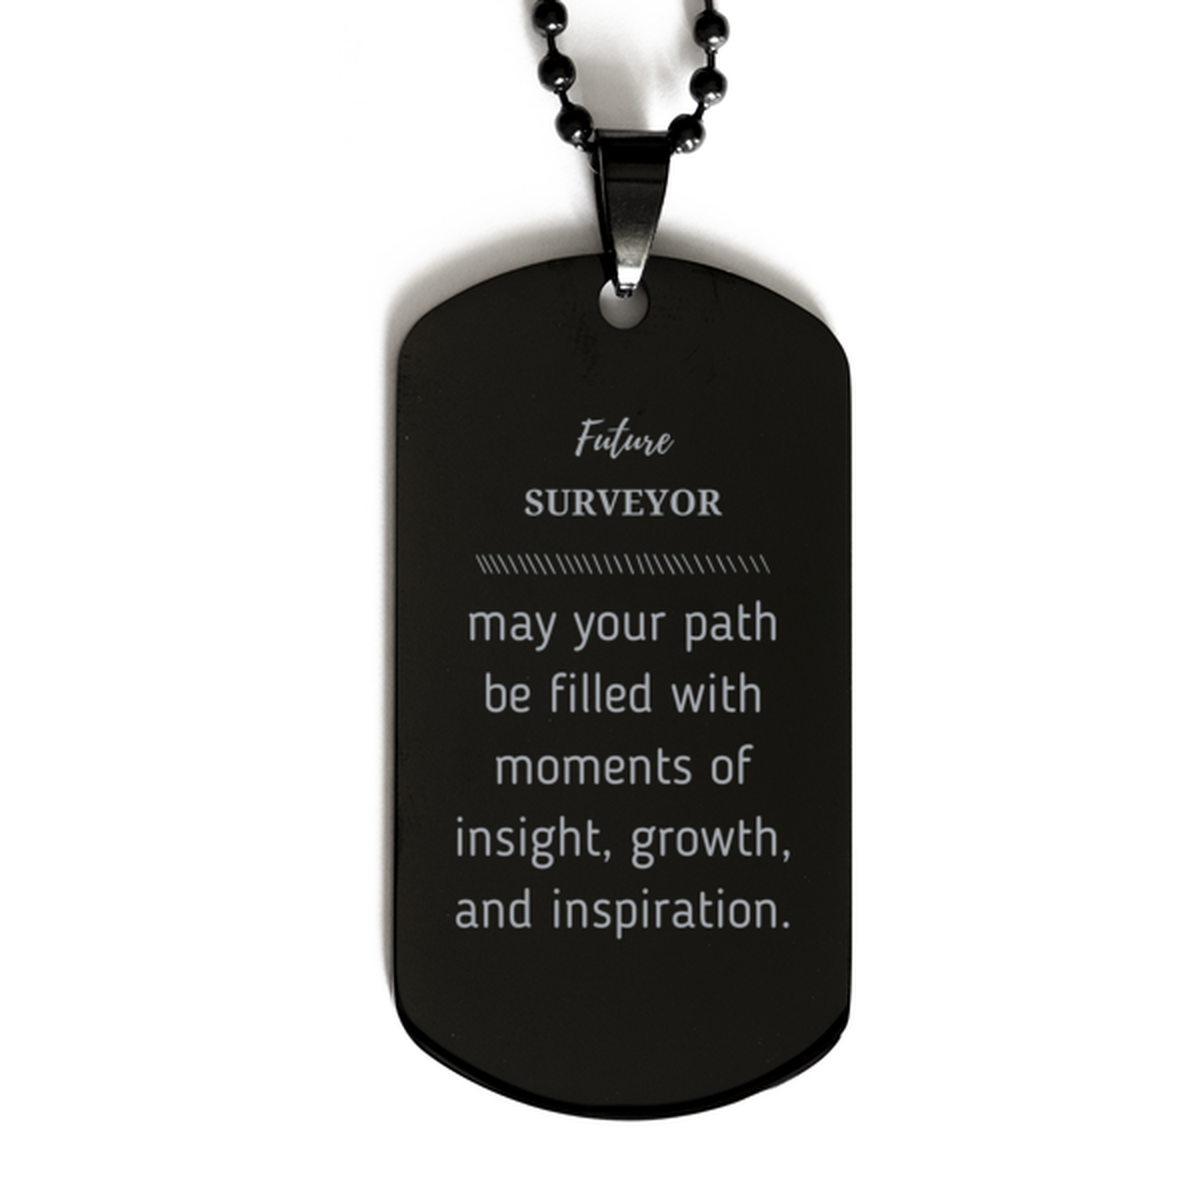 Future Surveyor Gifts, May your path be filled with moments of insight, Graduation Gifts for New Surveyor, Christmas Unique Black Dog Tag For Men, Women, Friends